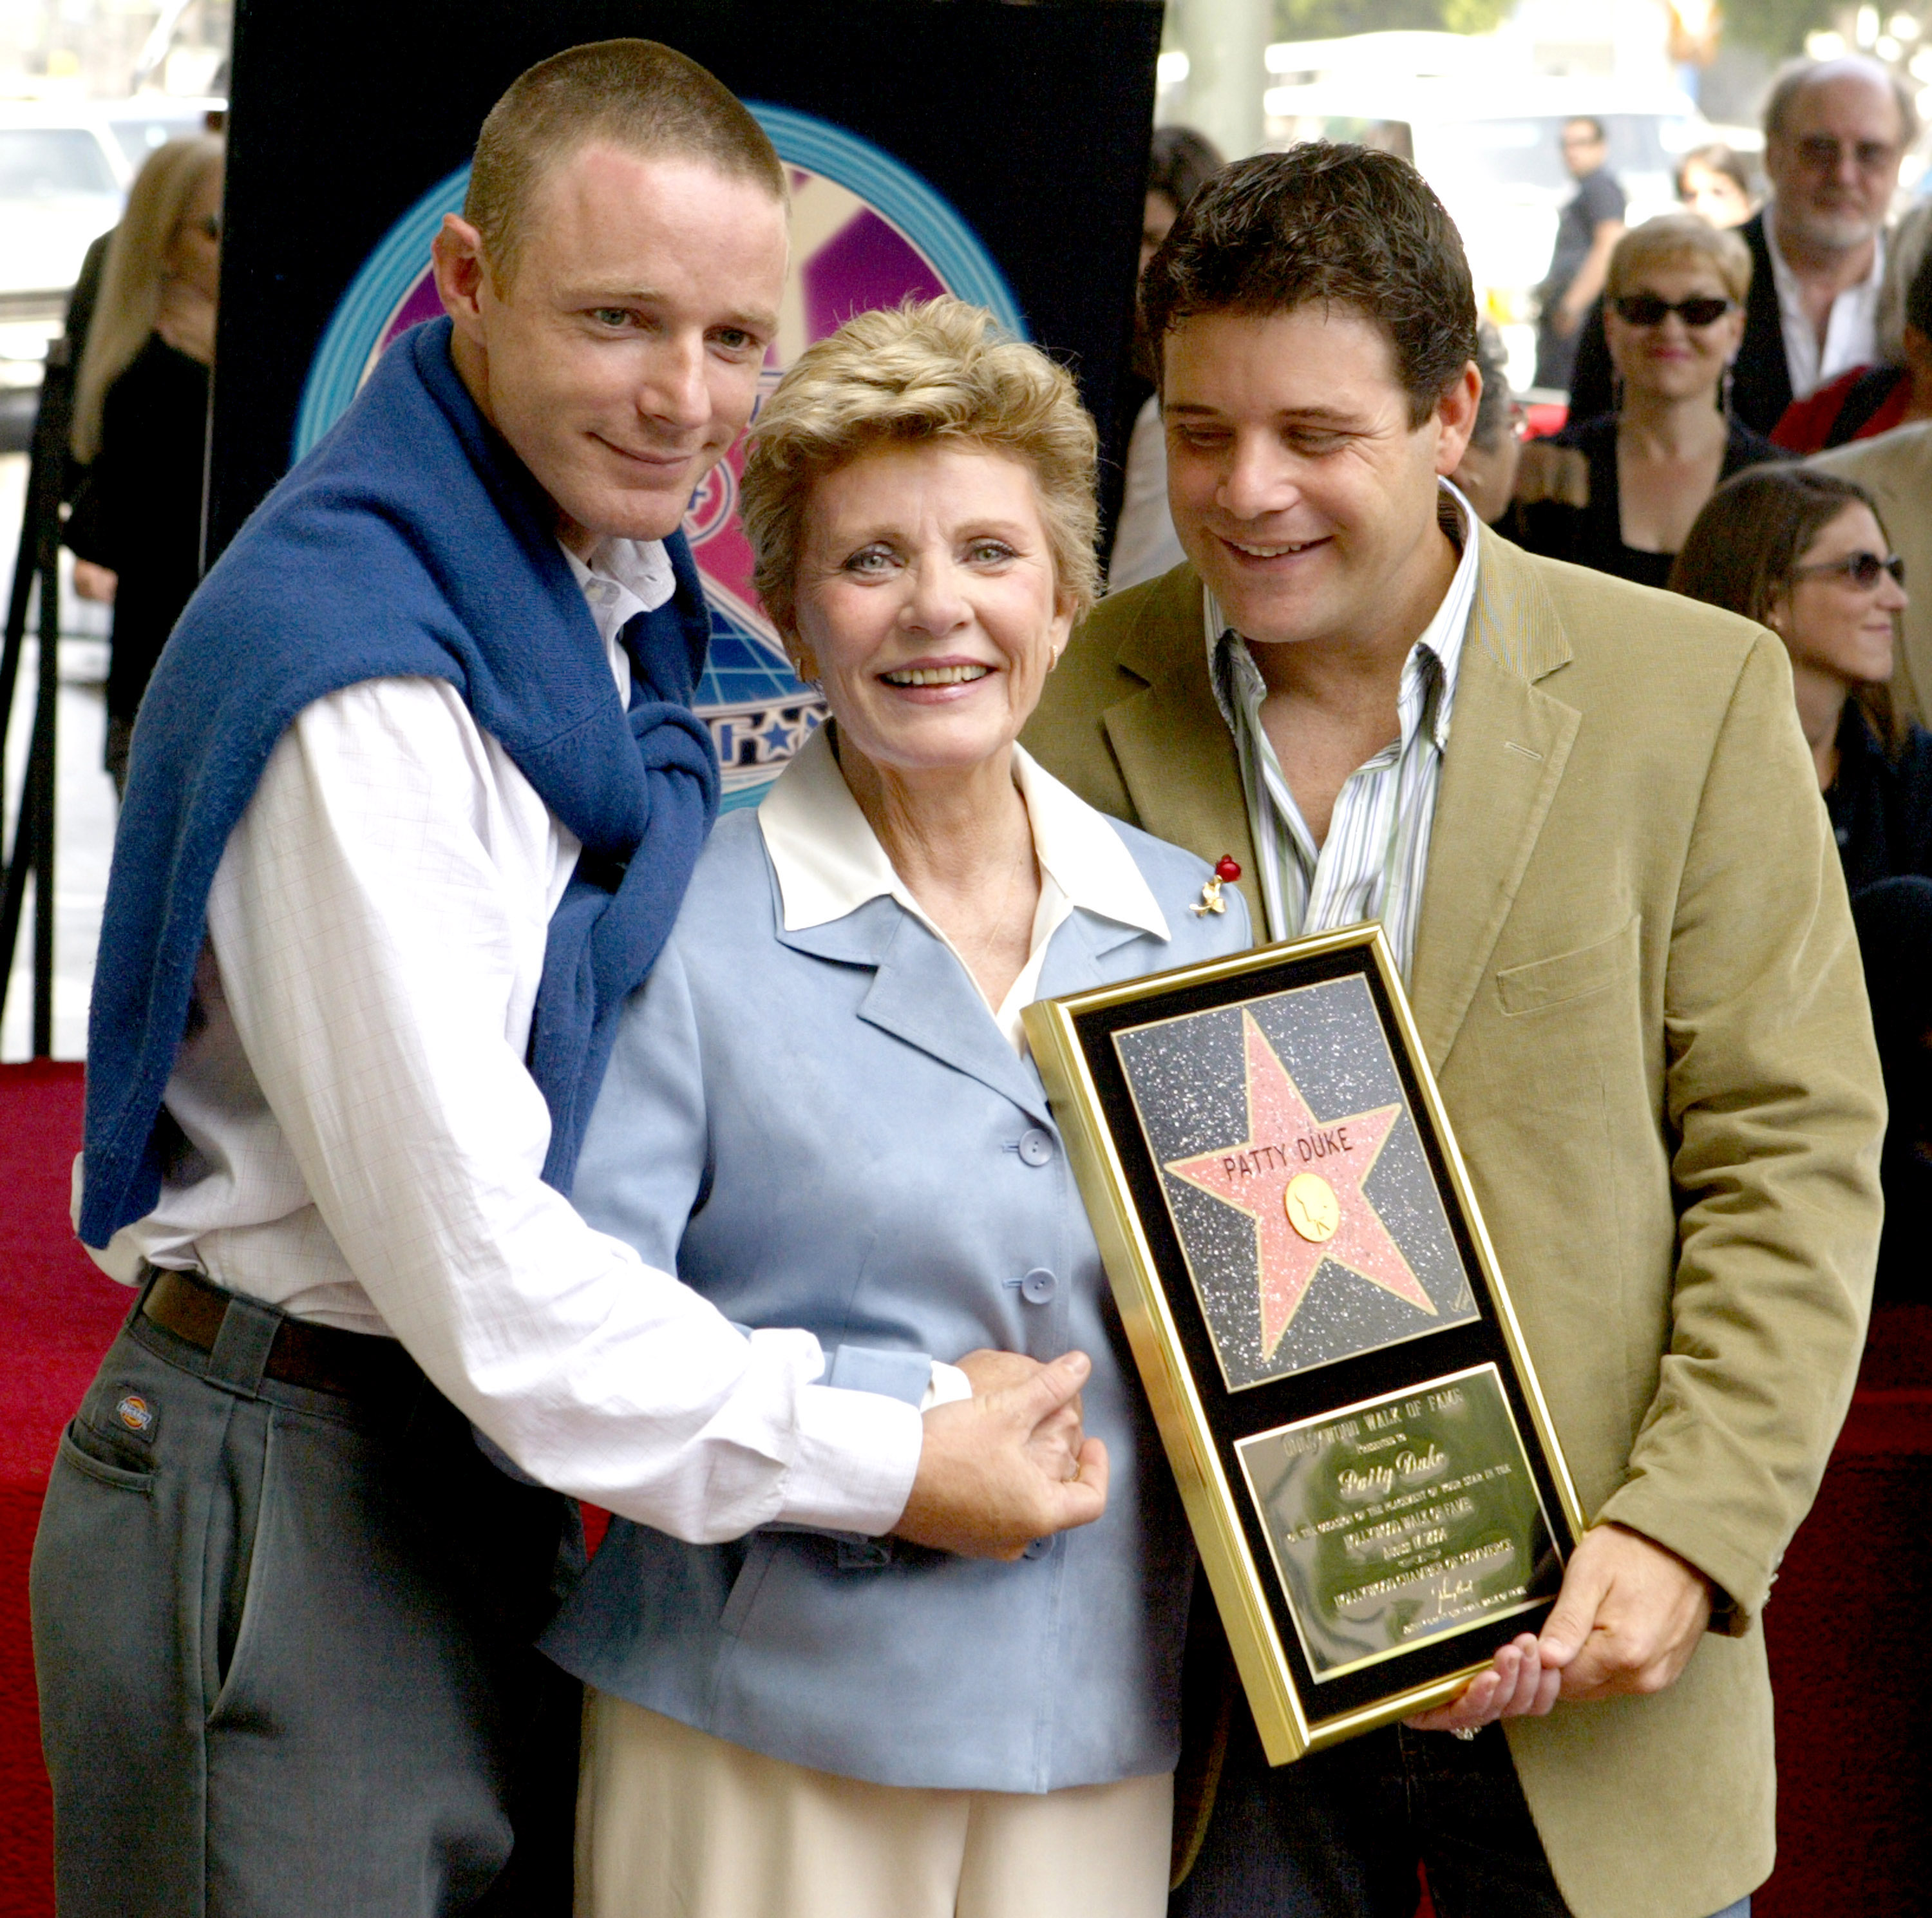 Patty Duke, Mackenzie Astin, and Sean Astin when Duke was honored with a star on the Hollywood Walk of Fame in 2004 | Source: Getty Images